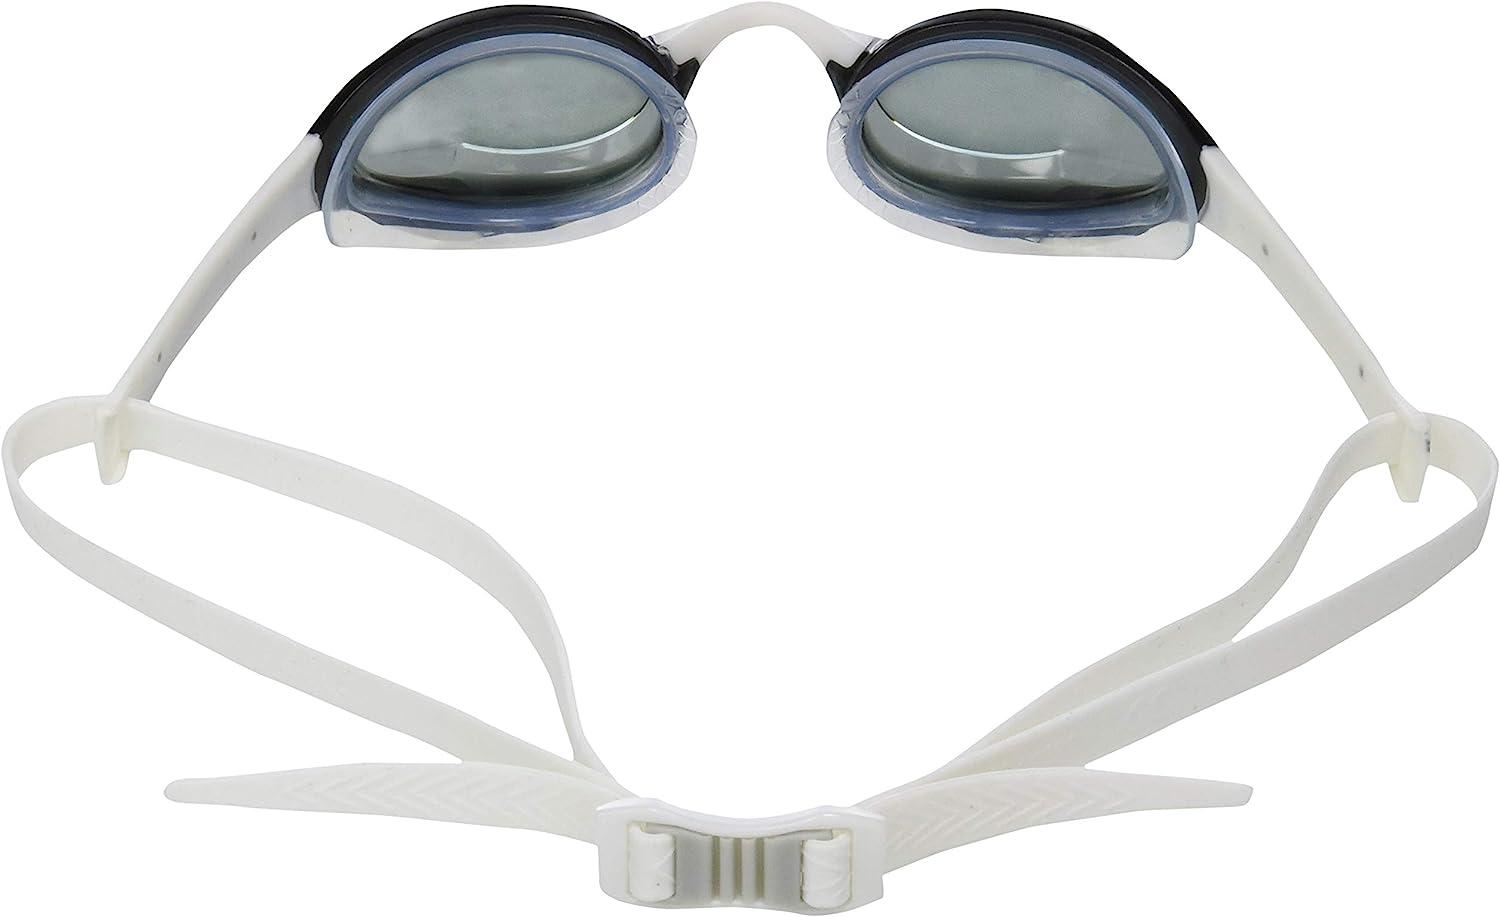  TYR Tracer x Elite Mirrored Race Goggle- Silver Black Silver,  NA : Sports & Outdoors